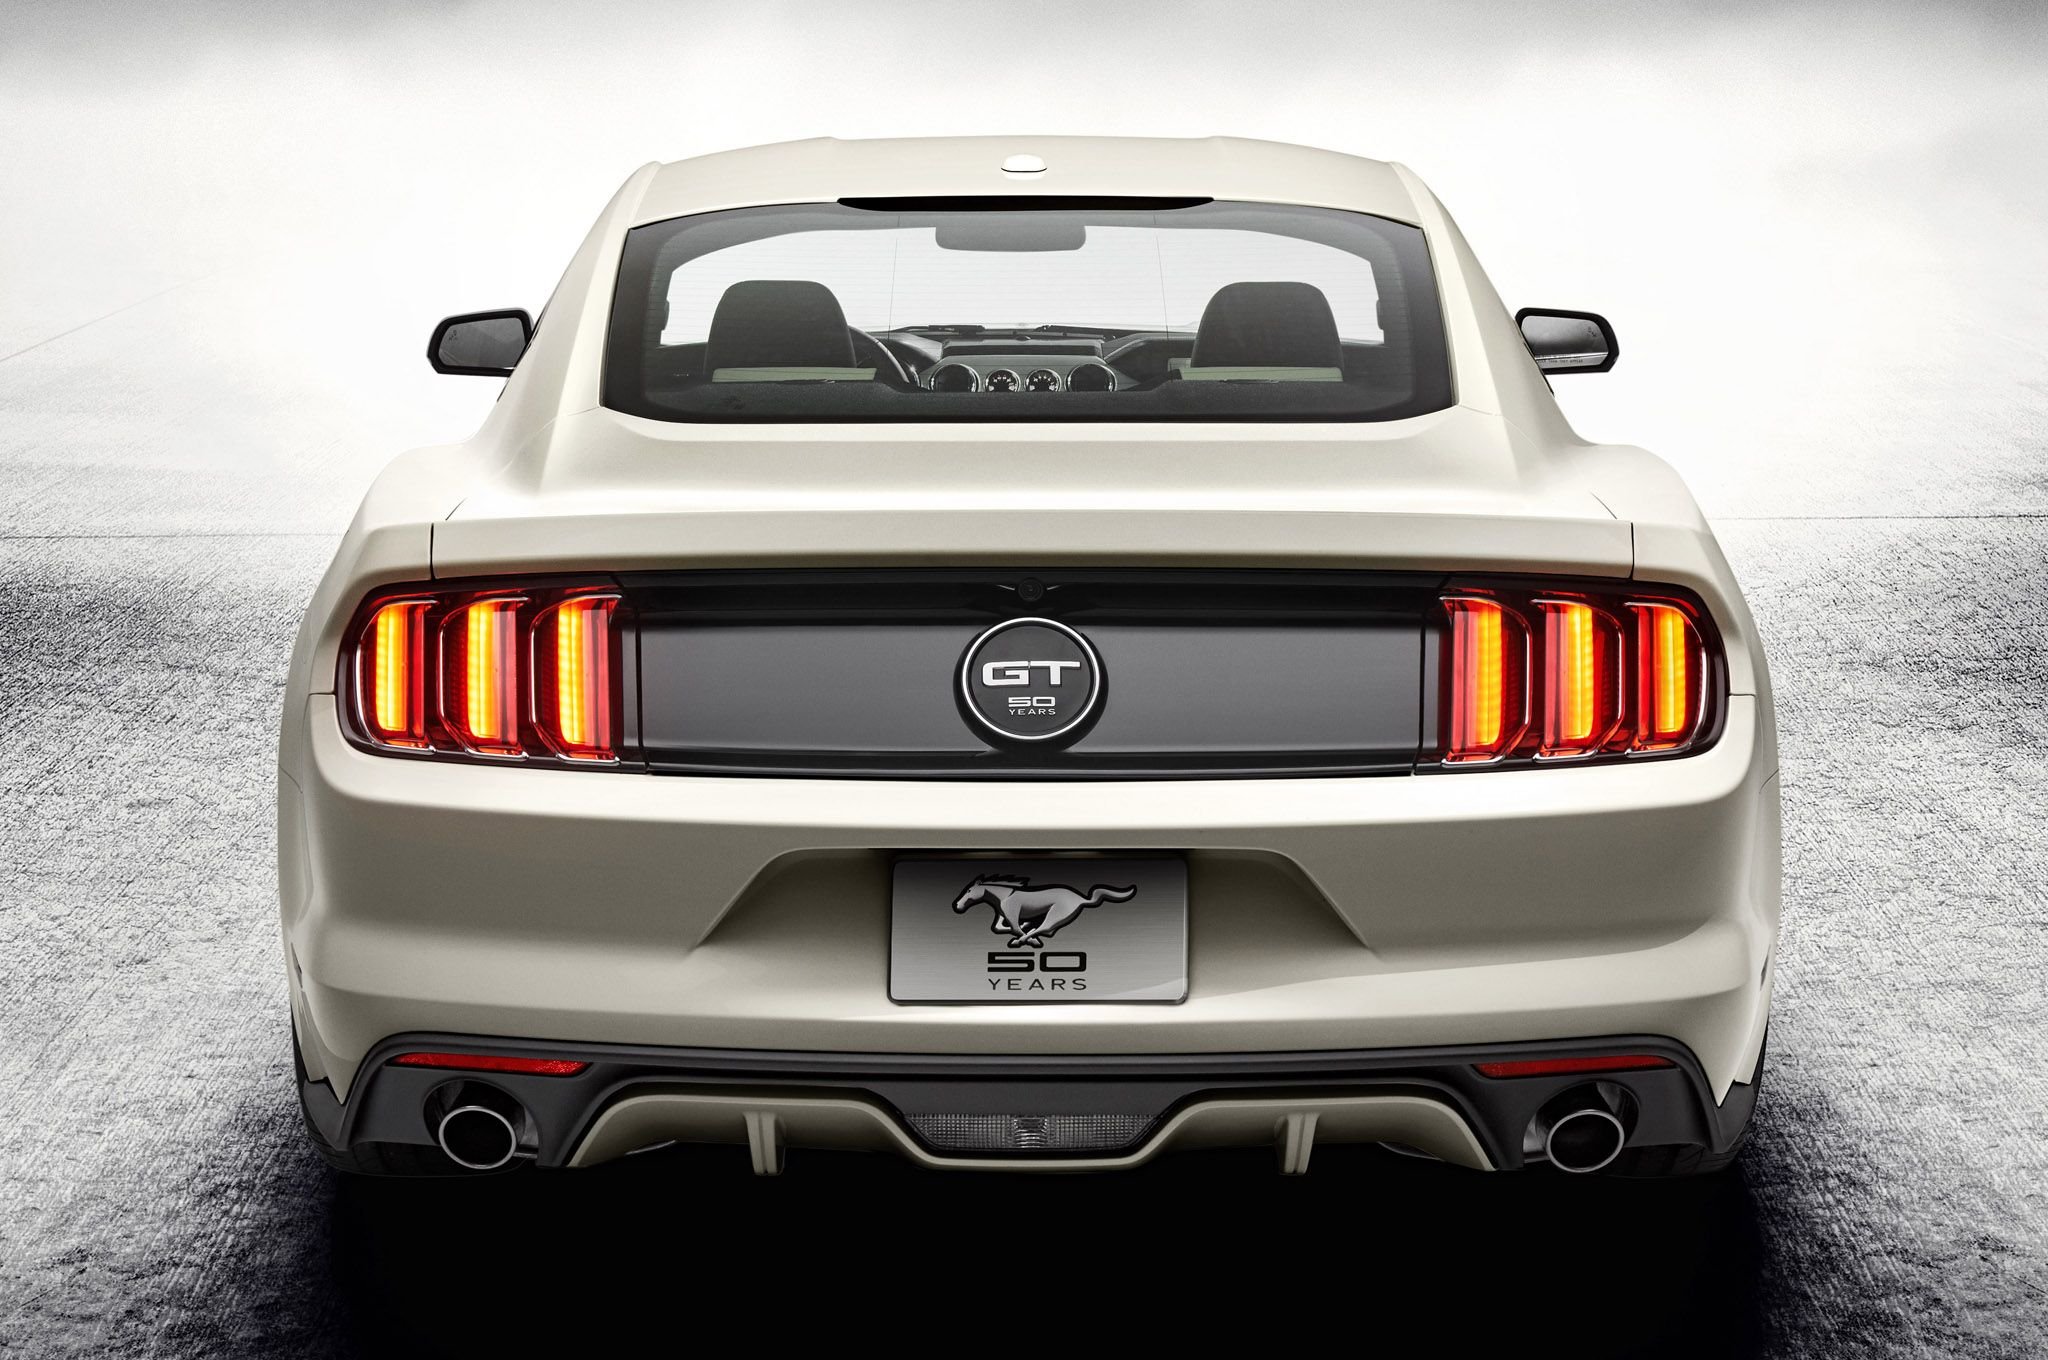 2015, Ford, Mustang, 50, Year, Limited, Edition, 50, Badge, Supercar, Usa, 2048x1360 04 Wallpaper